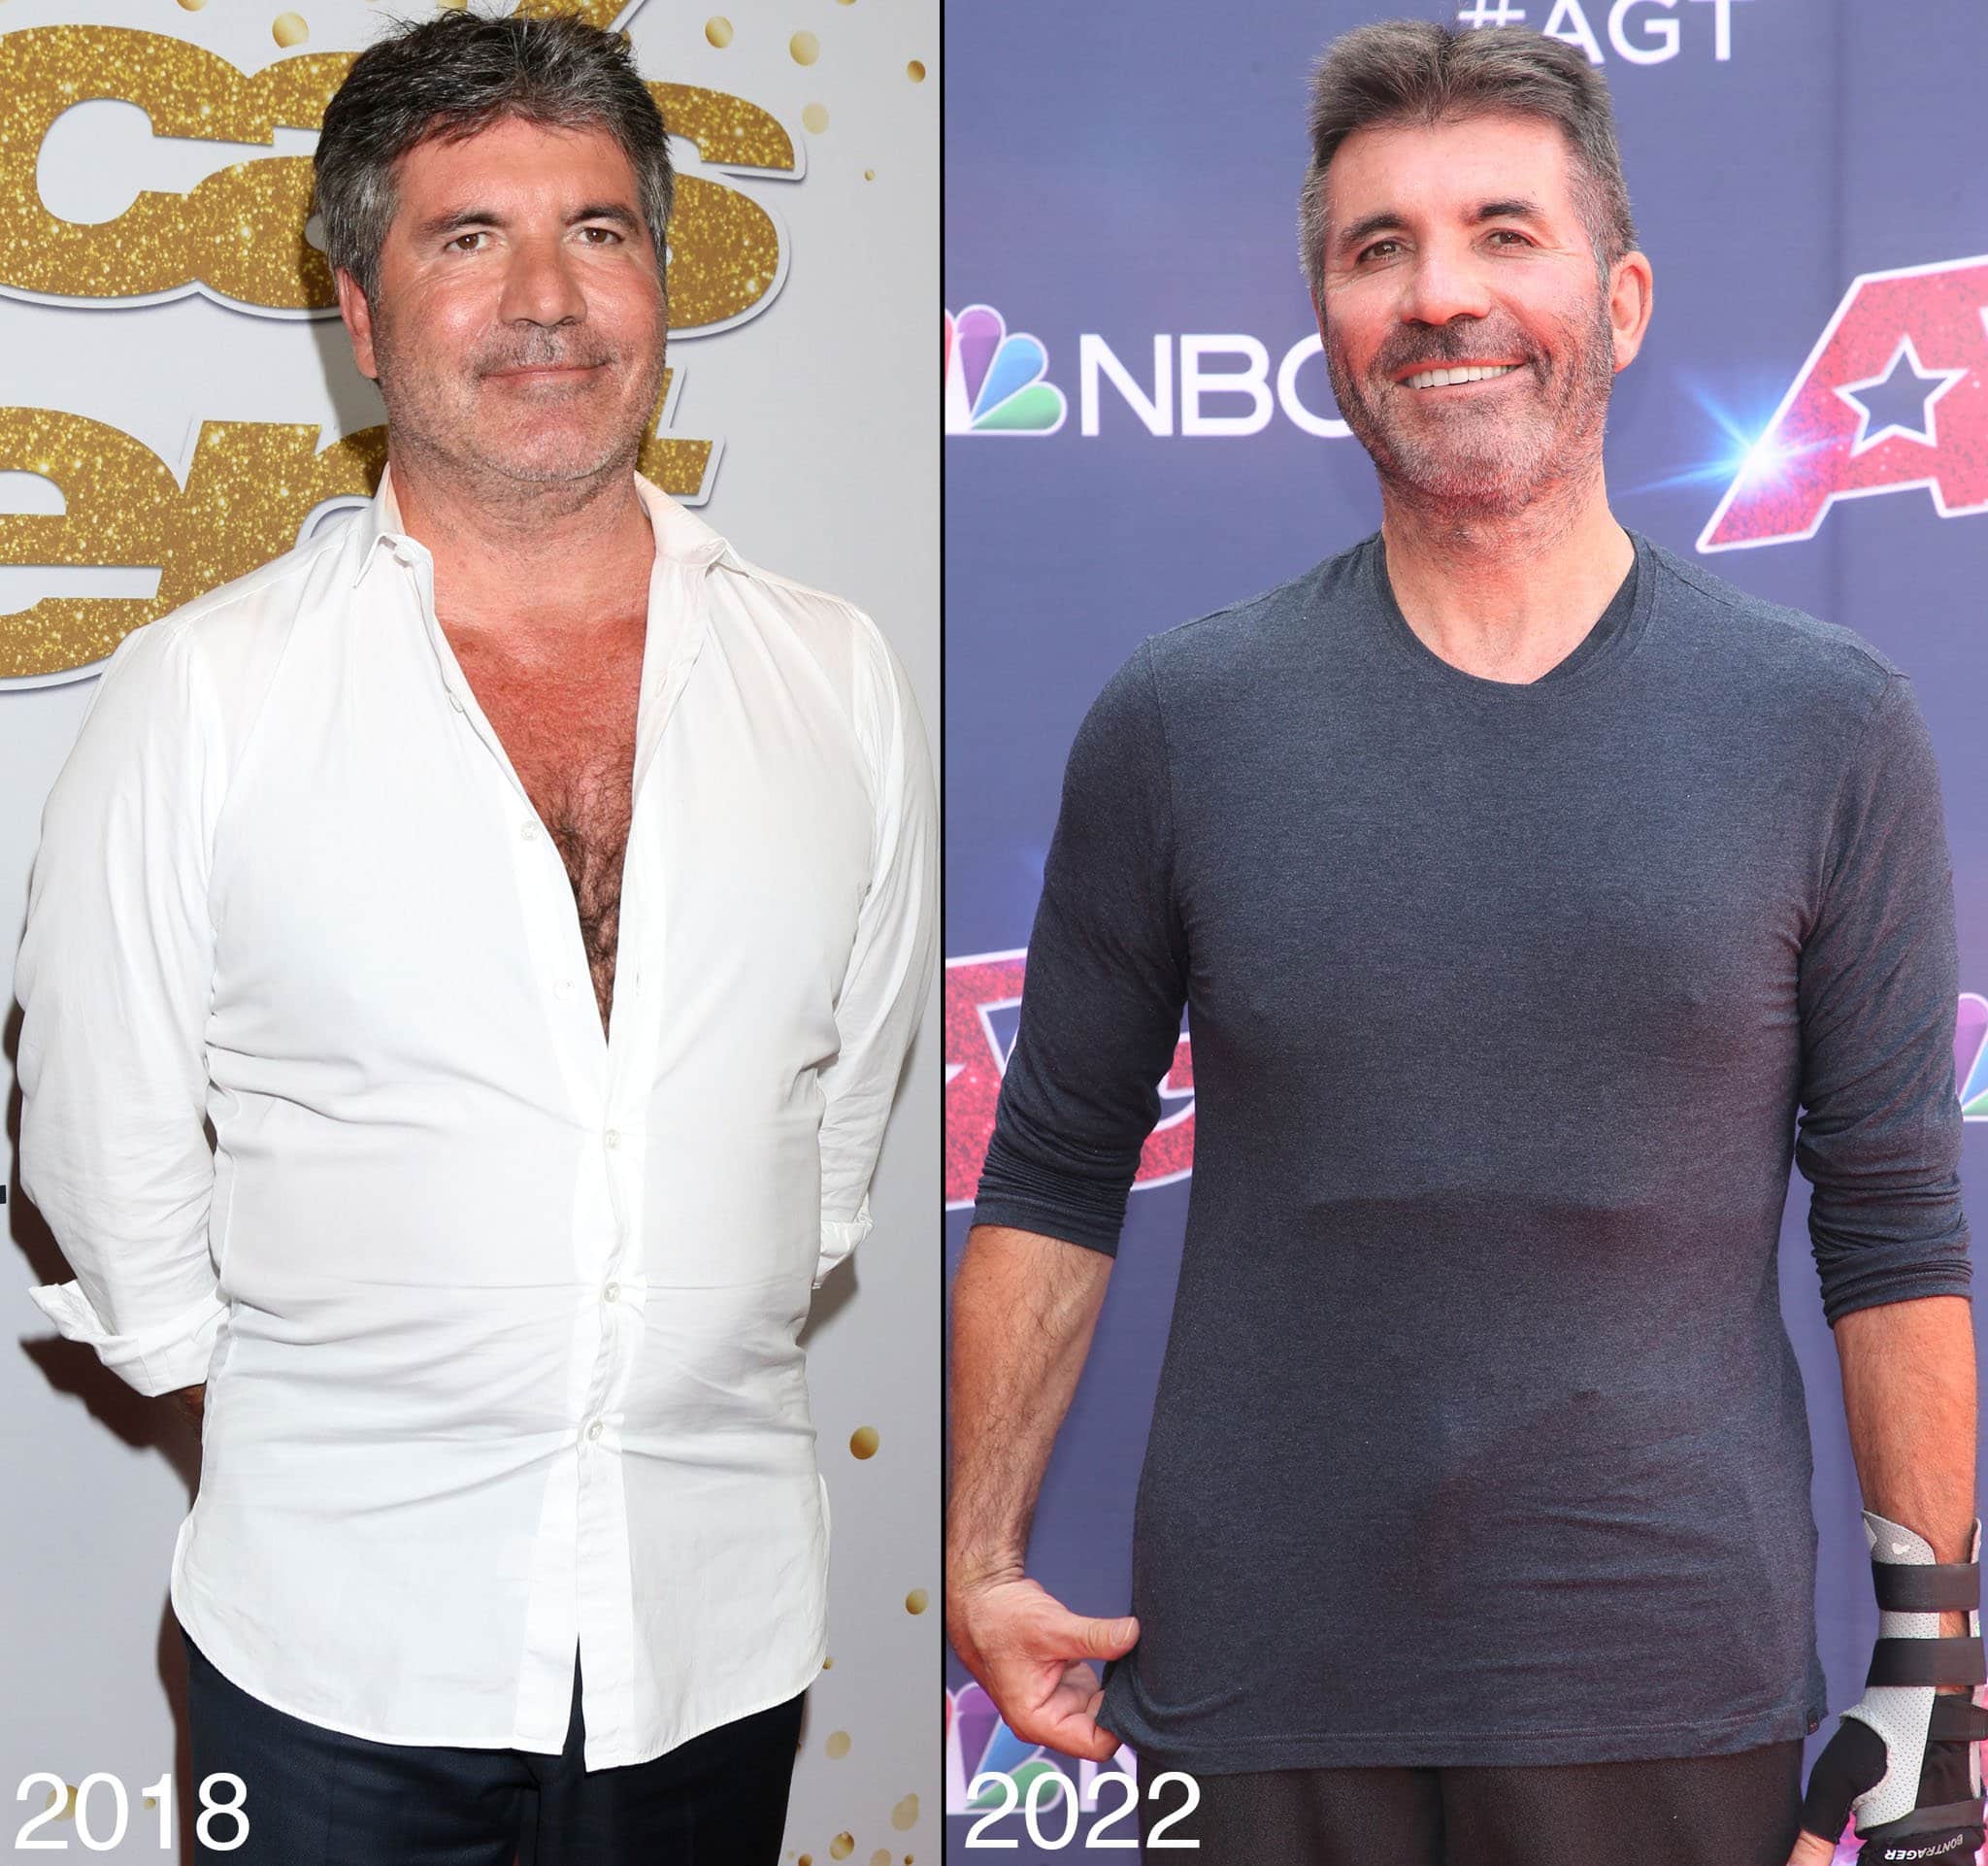 Simon Cowell cut out red meat, dairy, sugar, and gluten from his diet and lost over 60 pounds